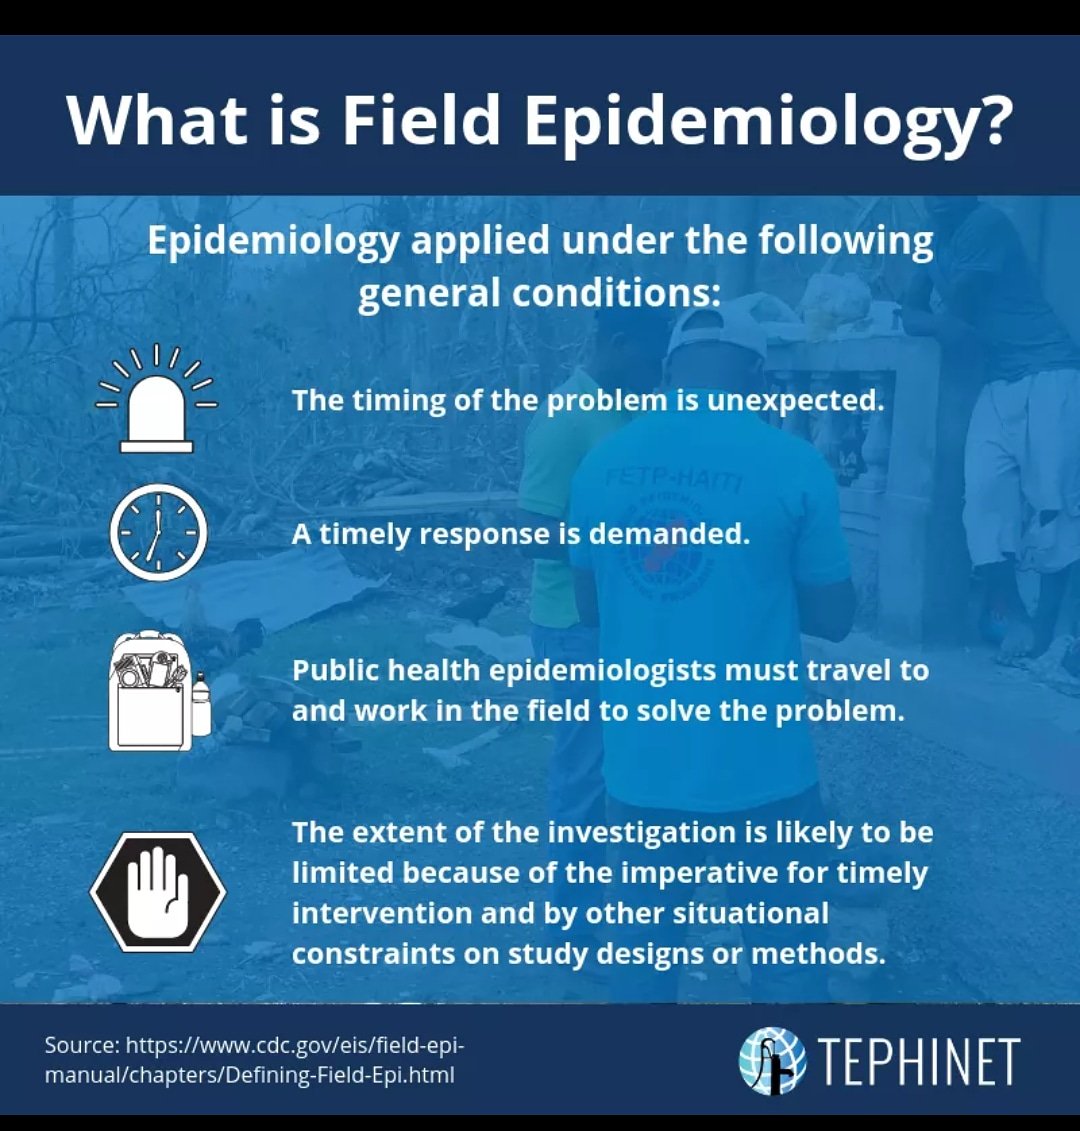 Defining field epidemiology--excerpted from the CDC Field Epidemiology Manual chapter of the same name: 

cdc.gov/eis/field-epi-…

#FieldEpidemiology #FETP #FELTP #TEPHINET